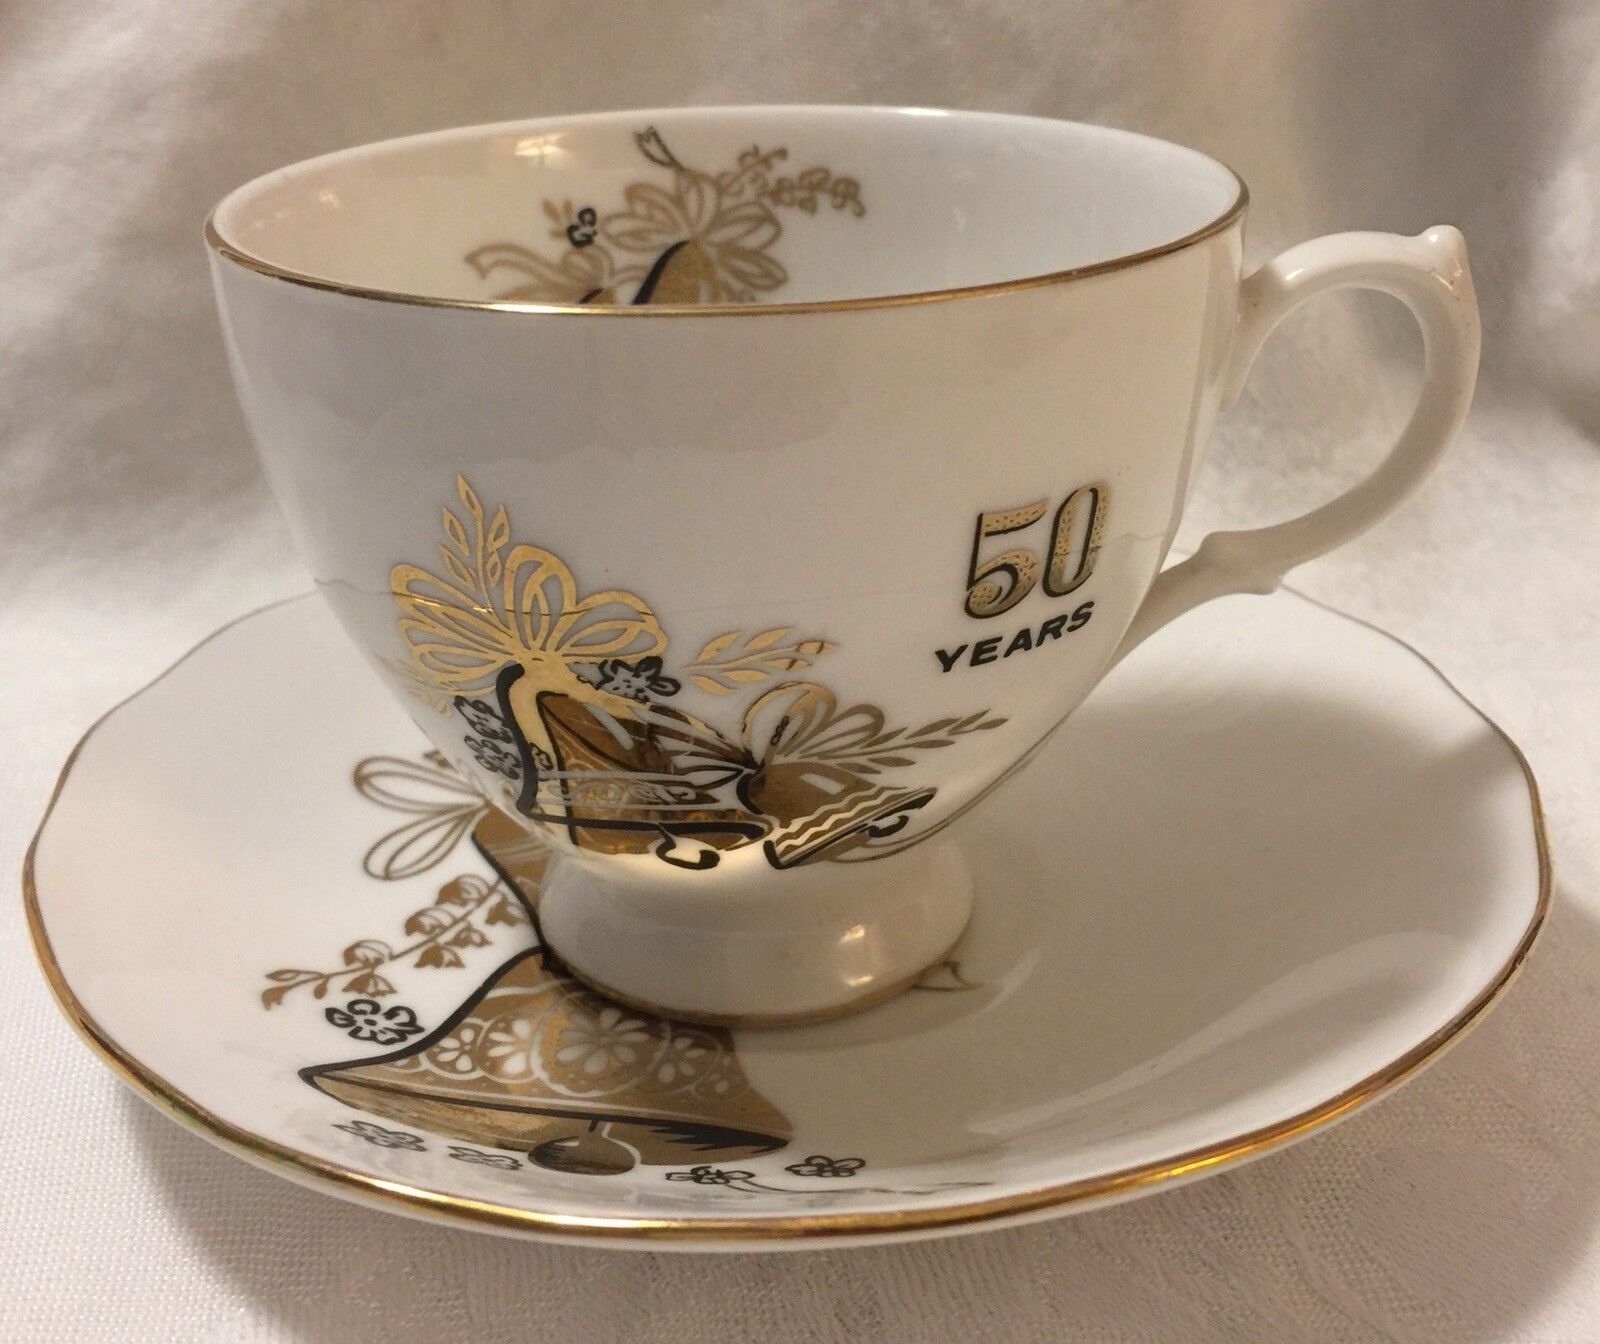 Vintage Queen Anne 50 Years Porcelain Tea Cup Saucer Ridgway Anniversary England